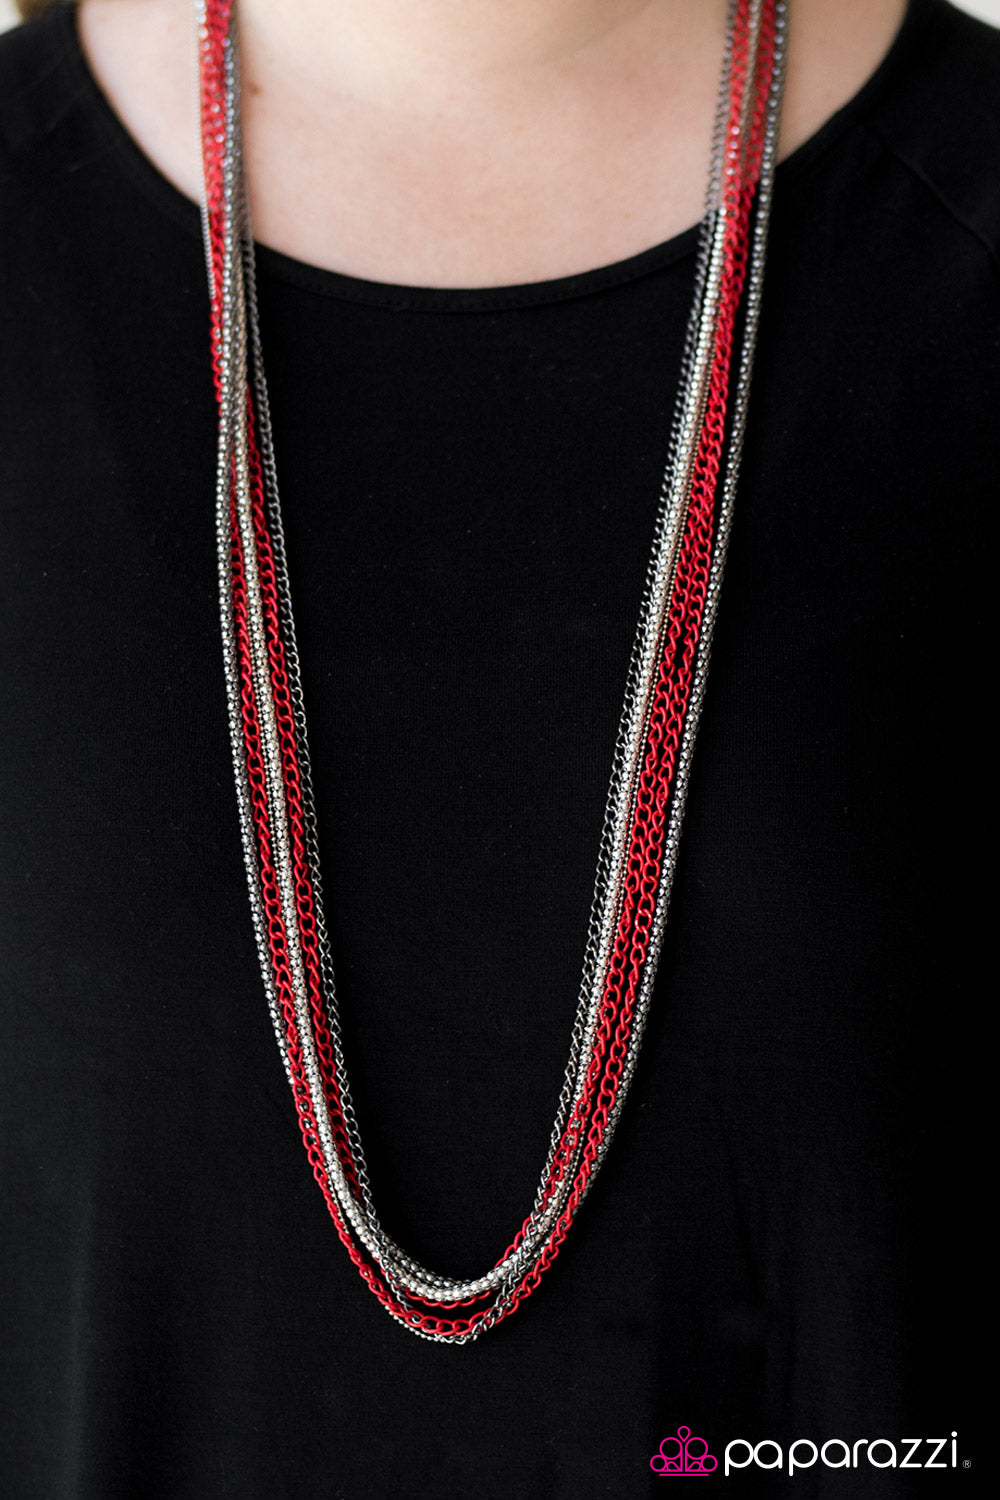 Colorful Calamity - Red - Paparazzi necklace